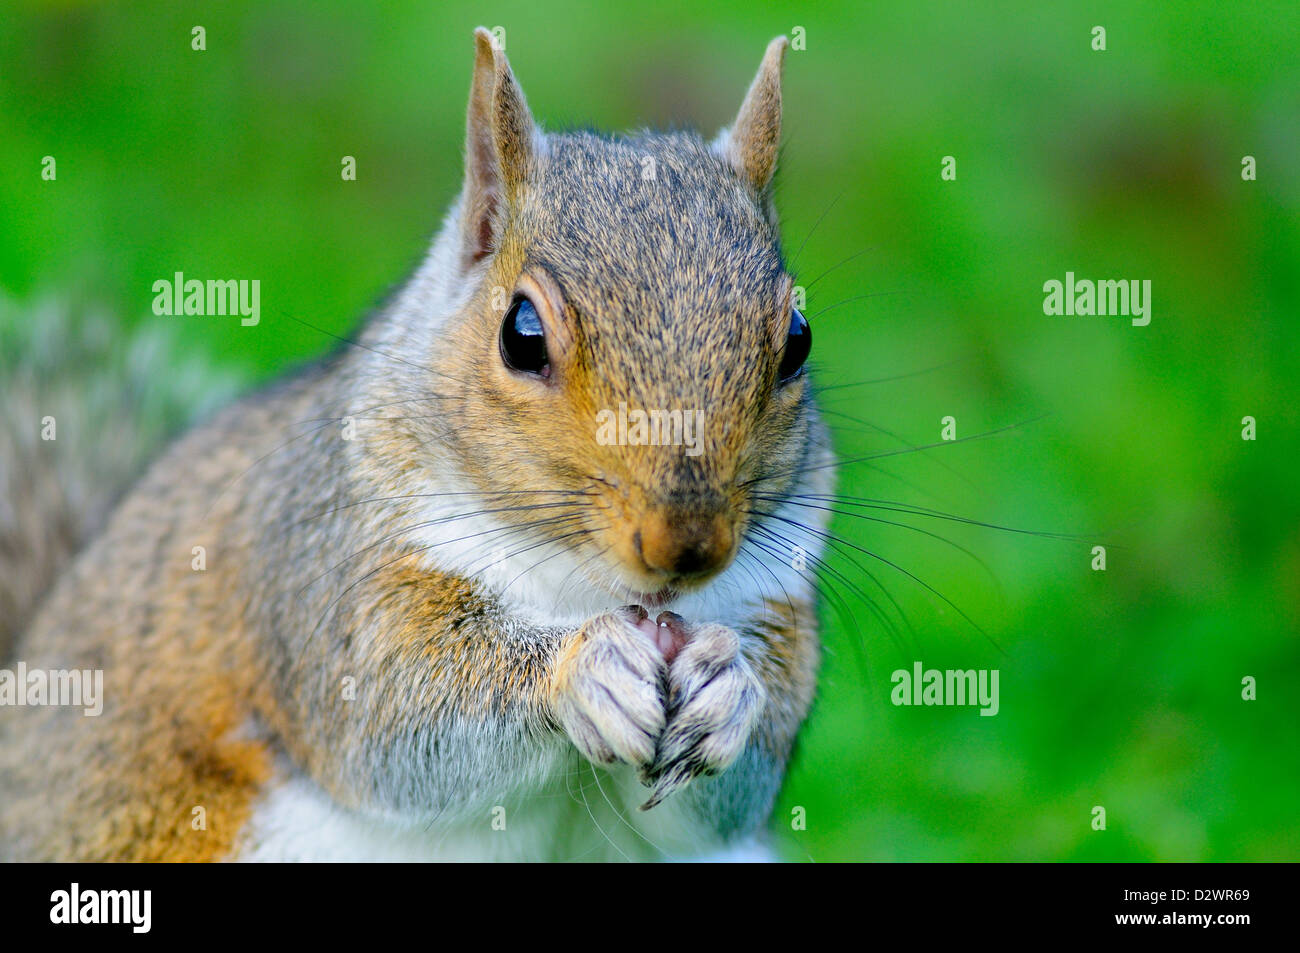 A grey squirrel eating a nut from its paws Stock Photo